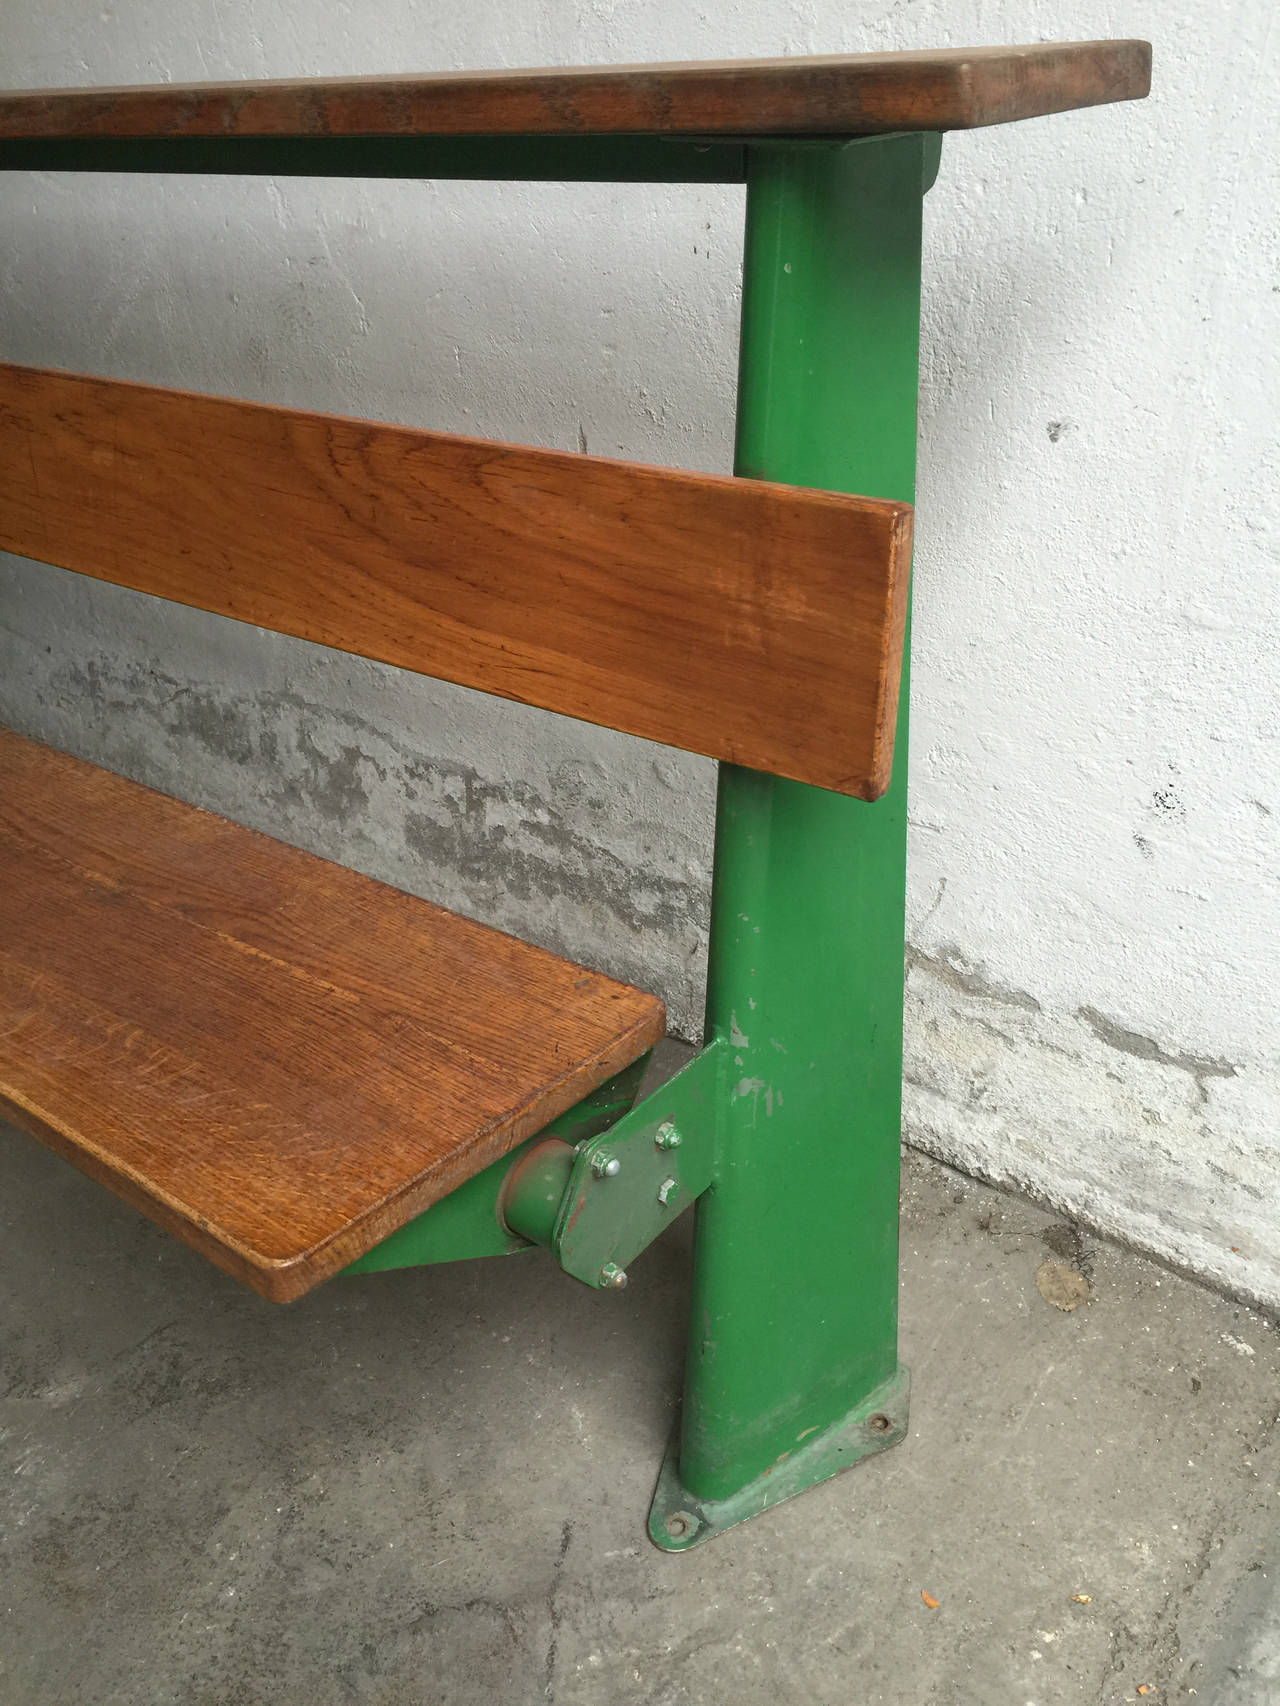 Bench in wood and iron in good condition, built in 1953